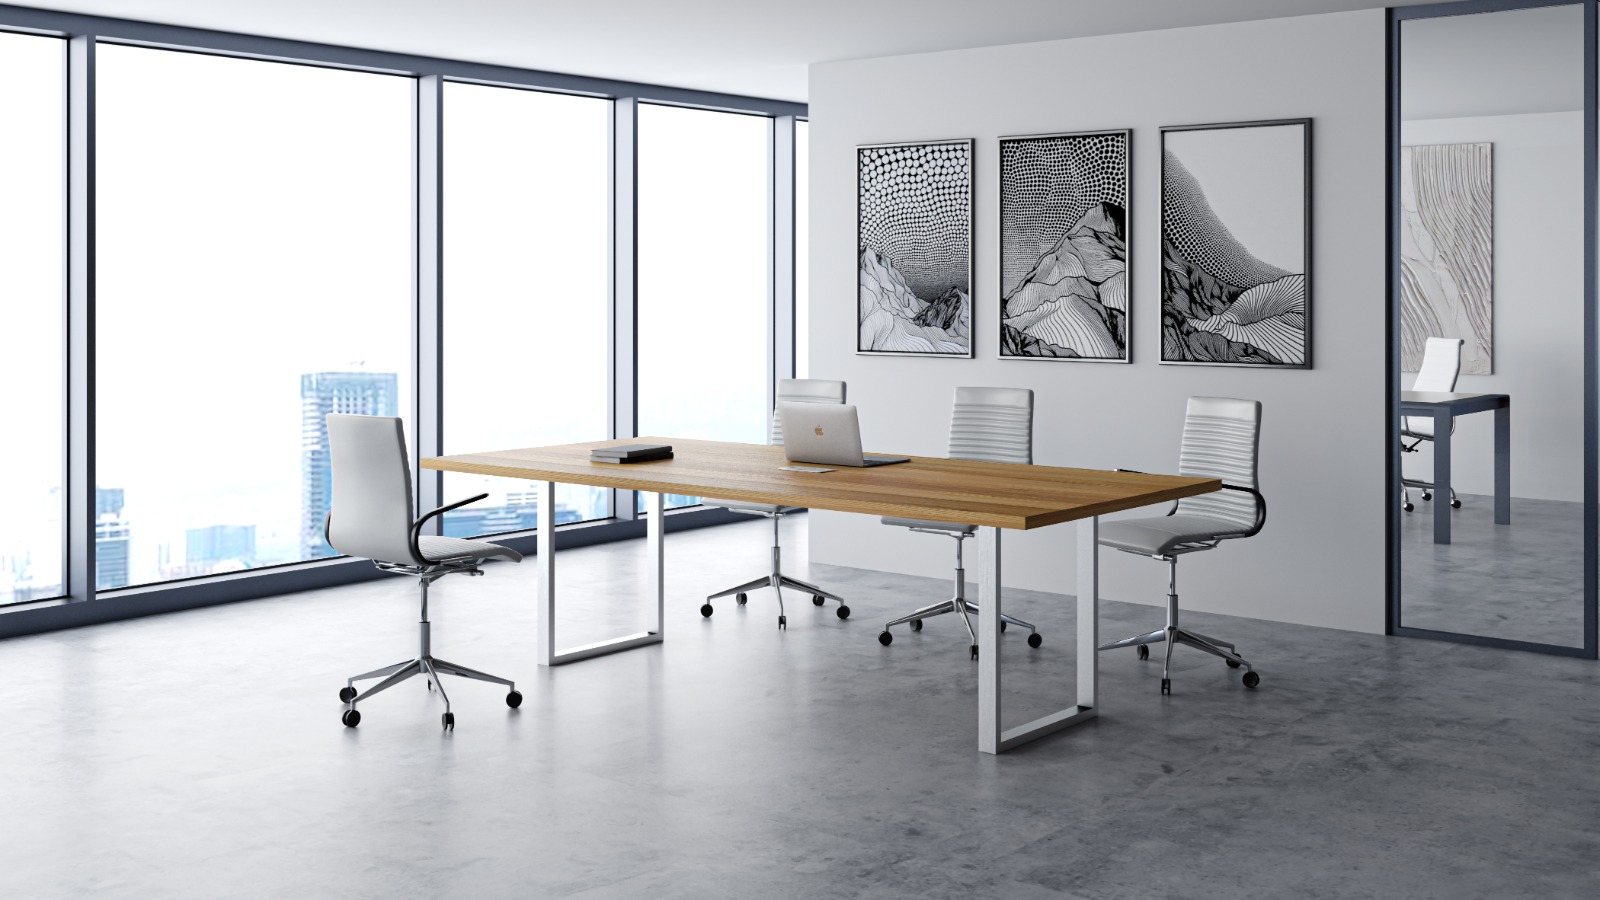 office furniture collections - Conference table with chairs